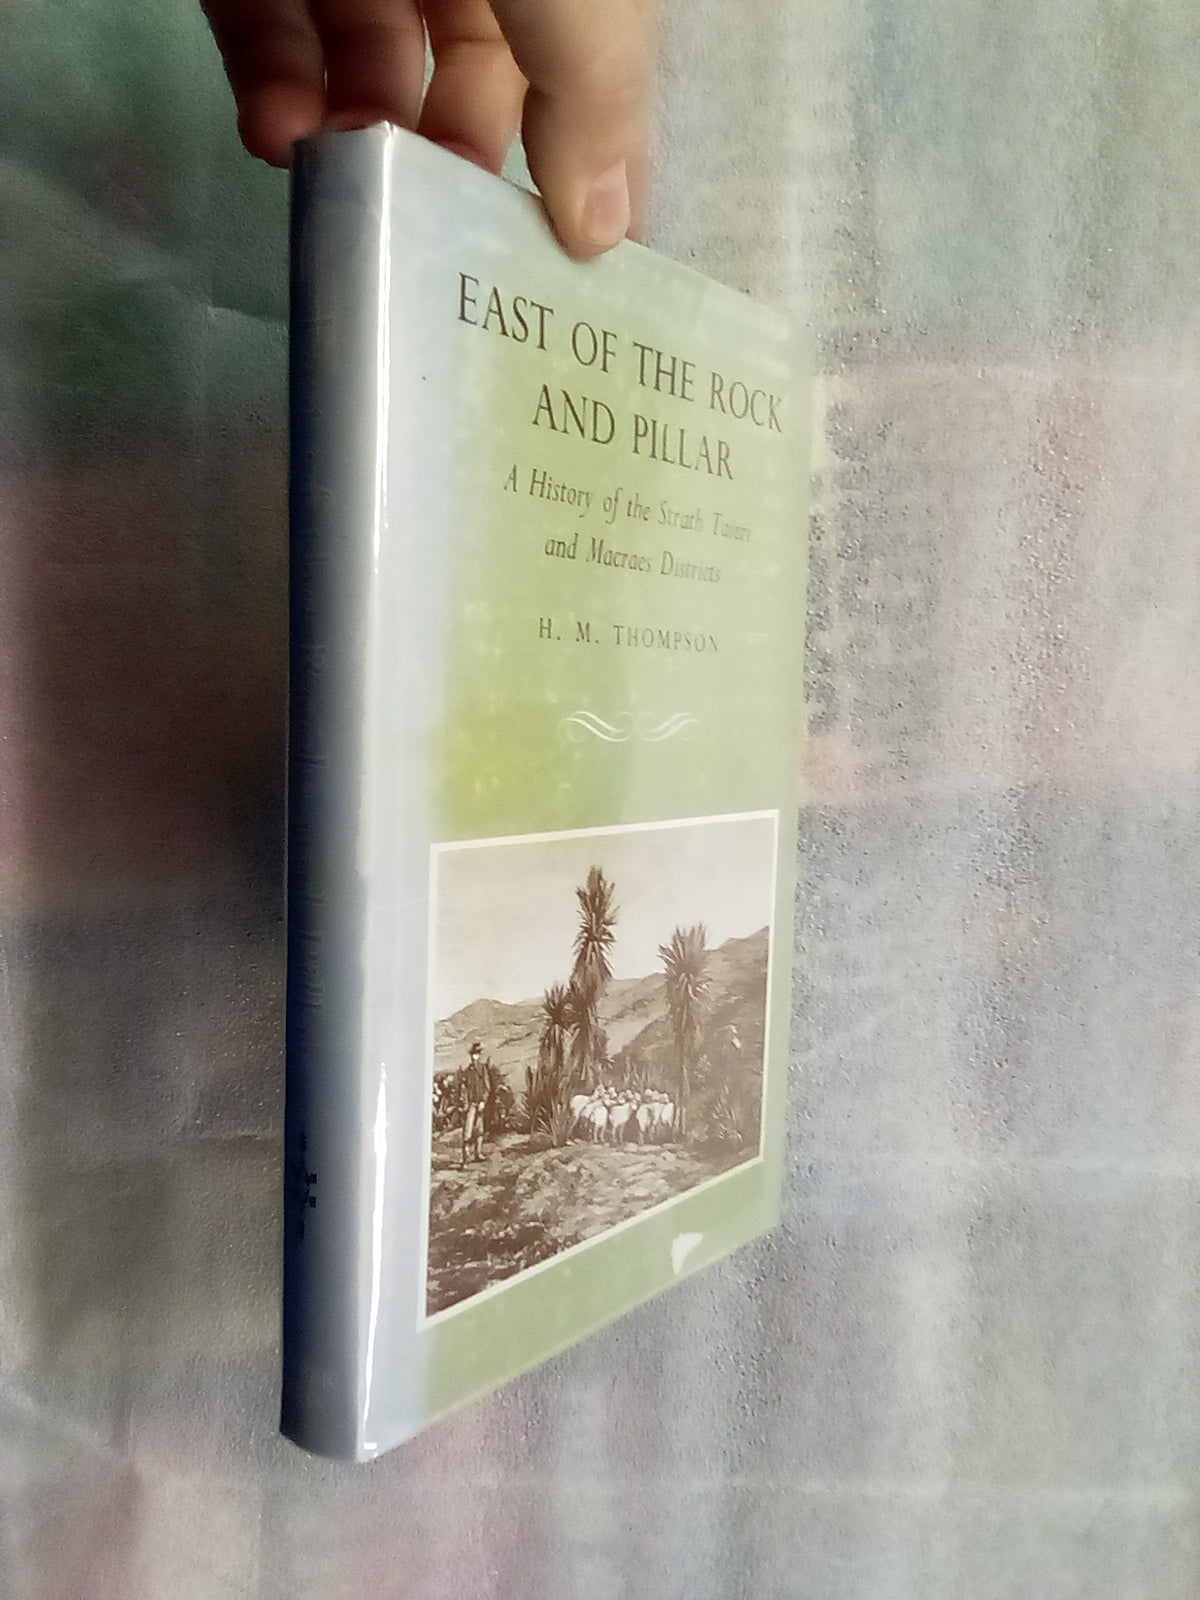 East of the Rock and Pillar - A History of the Strath Taieri and Macraes Districts